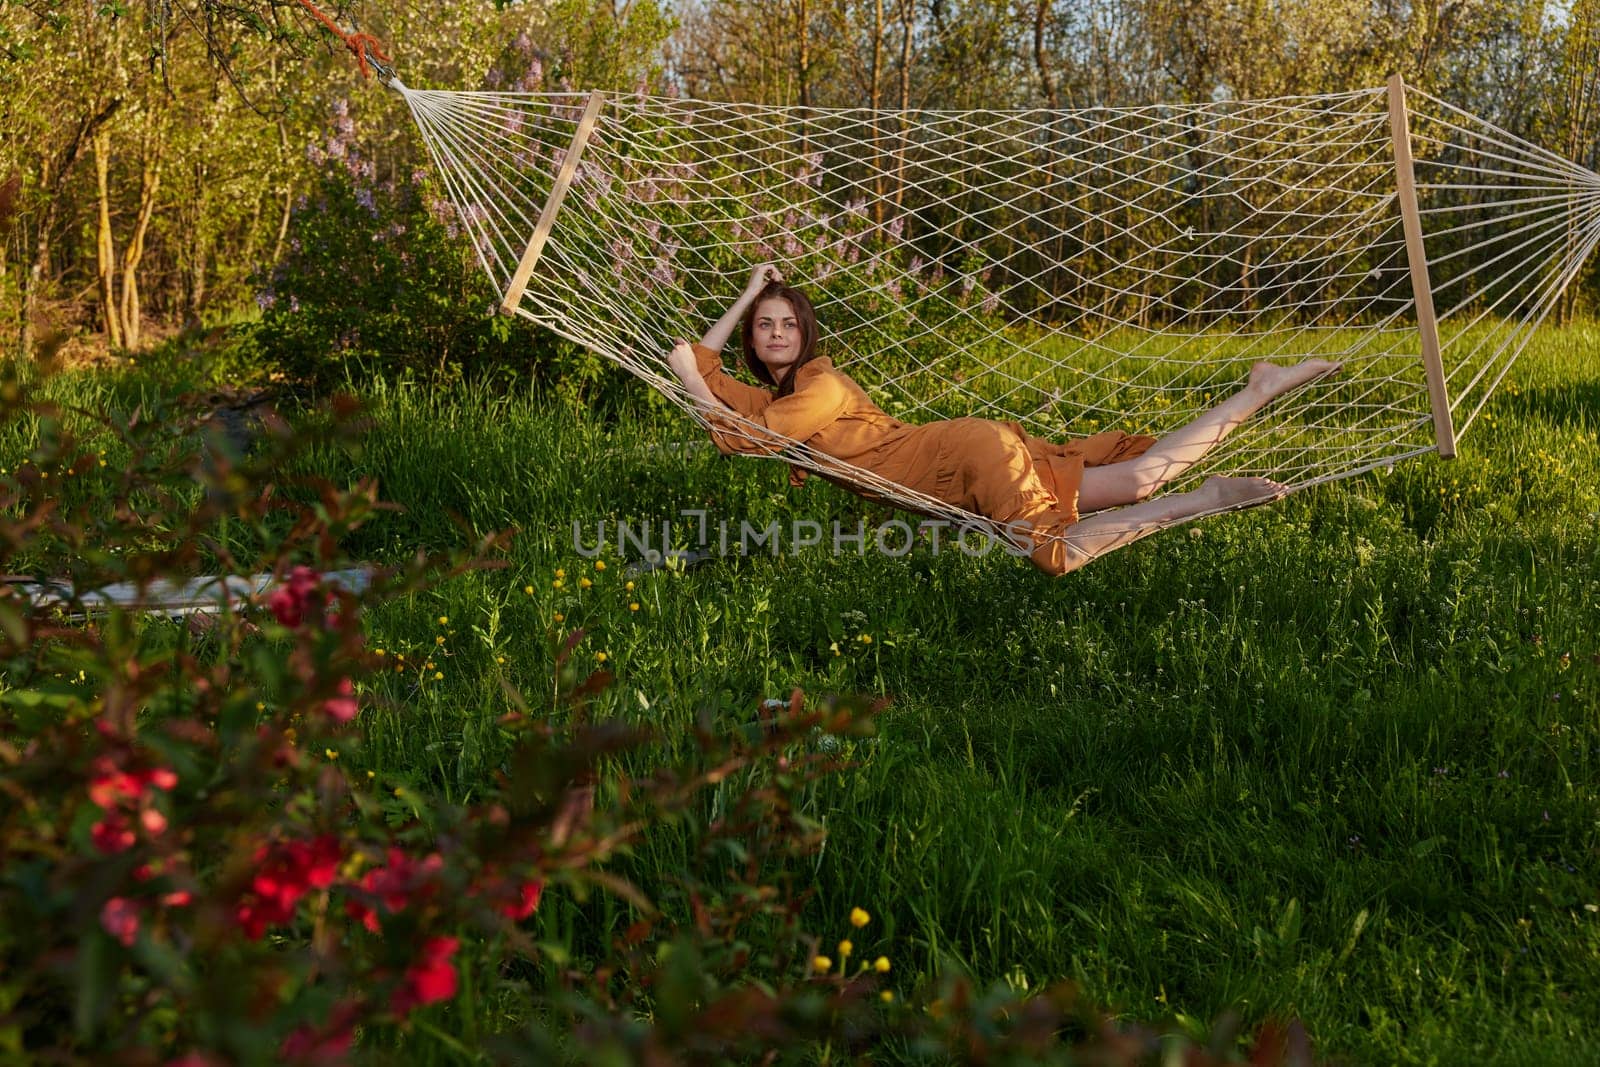 a happy woman in a long orange dress is relaxing in nature lying in a mesh hammock enjoying summer and vacation in the country surrounded by green foliage. High quality photo